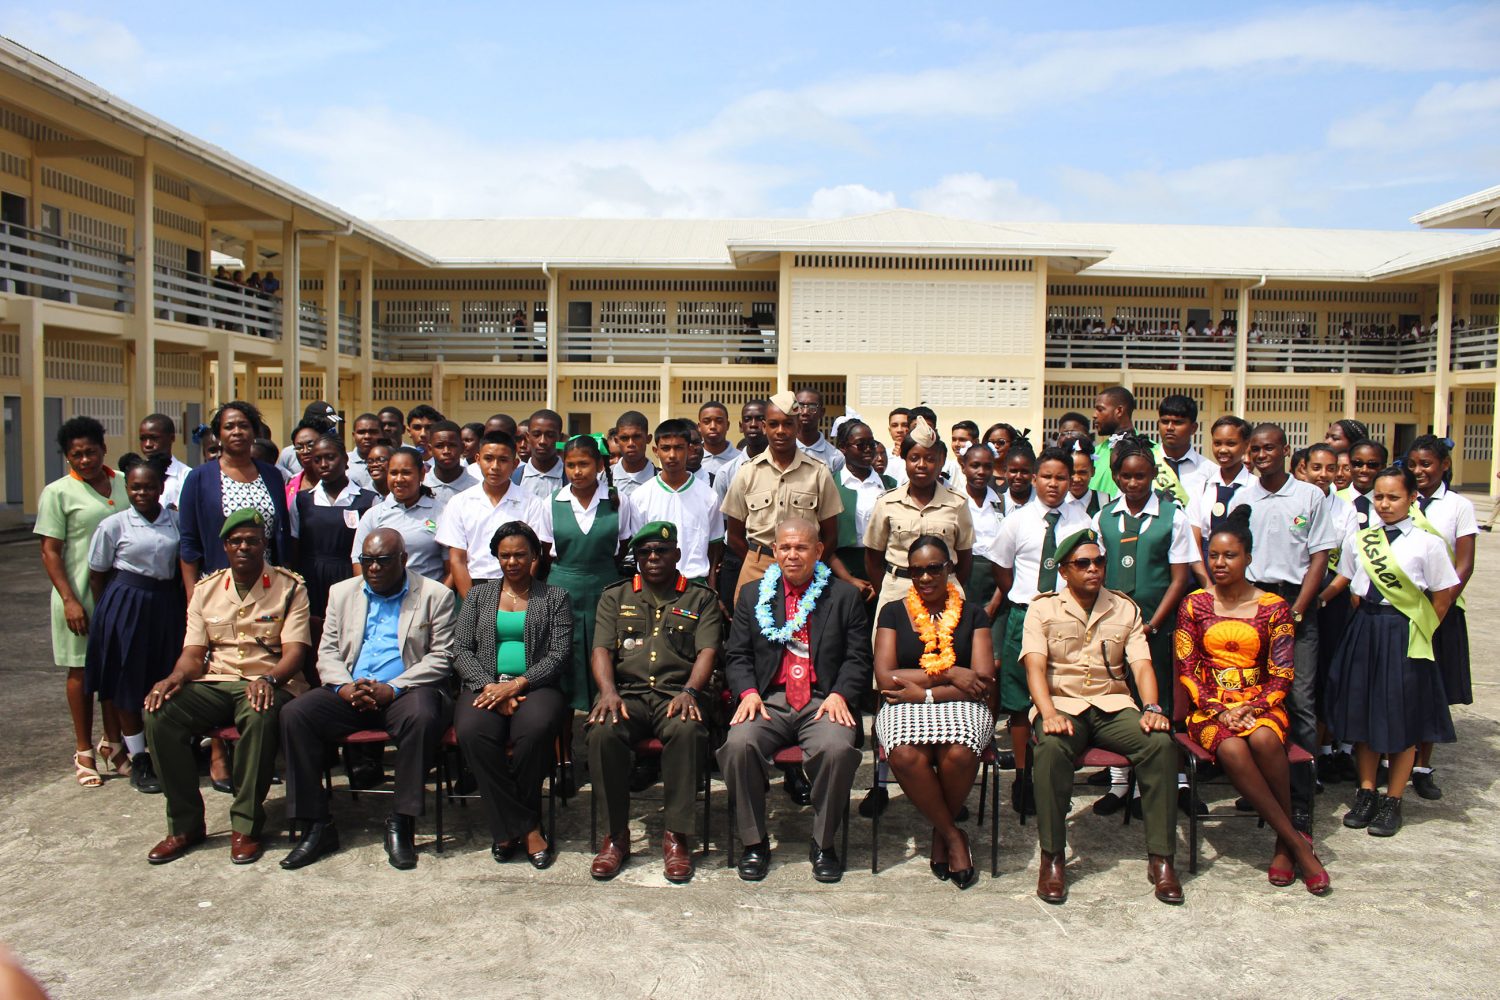 Officials from the ministries of Education and Social Cohesion, along with officers from the Guyana Defence Force, pose with students and teachers at the launch of the National Cadet Corps Programme yesterday. Seated in the photo are: Chief Education Officer Marcel Hutson (second, from left); Chief-of-Staff of the GDF Brigadier Patrick West (fourth, from left); Minister of Social Cohesion Dr George Norton (fourth, from right); and Minister of Education (third from right). (Photo by Keno George)